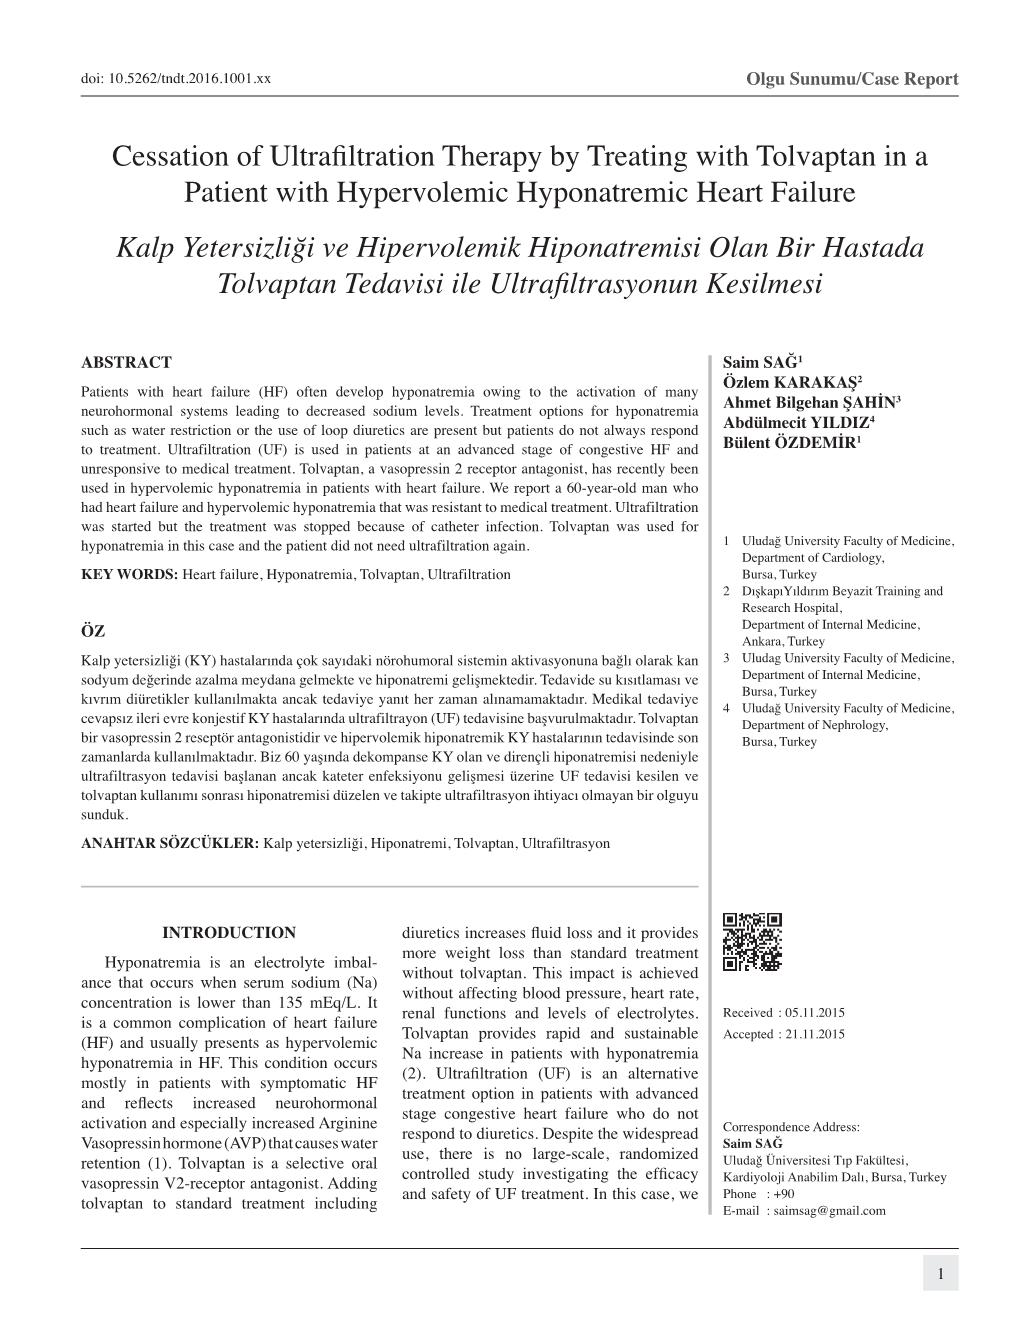 Cessation of Ultrafiltration Therapy by Treating with Tolvaptan in a Patient with Hypervolemic Hyponatremic Heart Failure Kalp Y